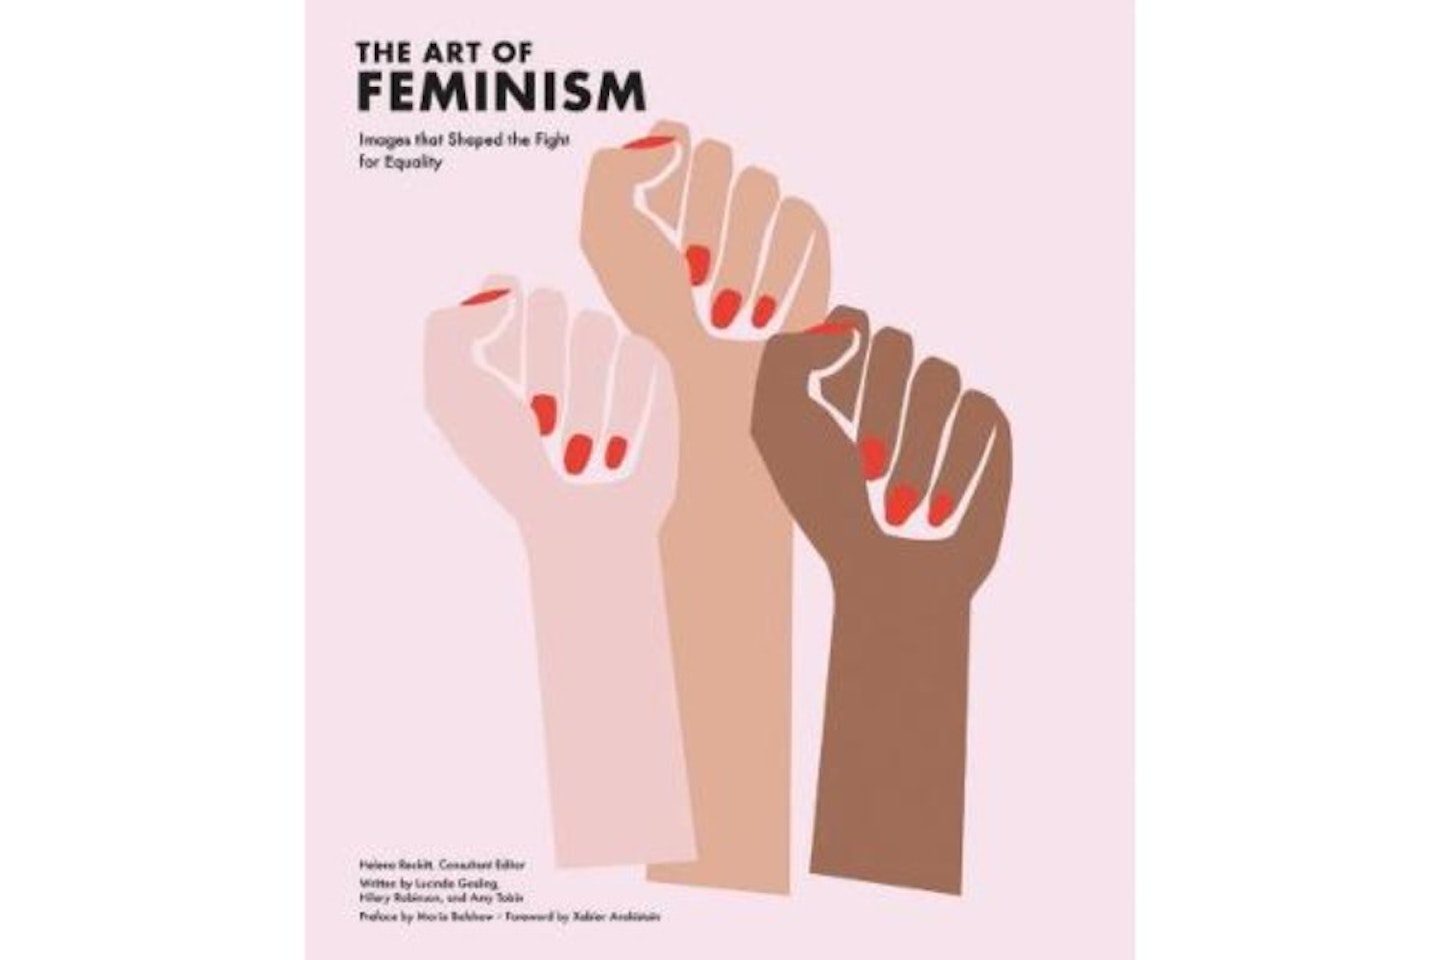 The Art of Feminism: Images that Shaped the Fight for Equality (Hardback)